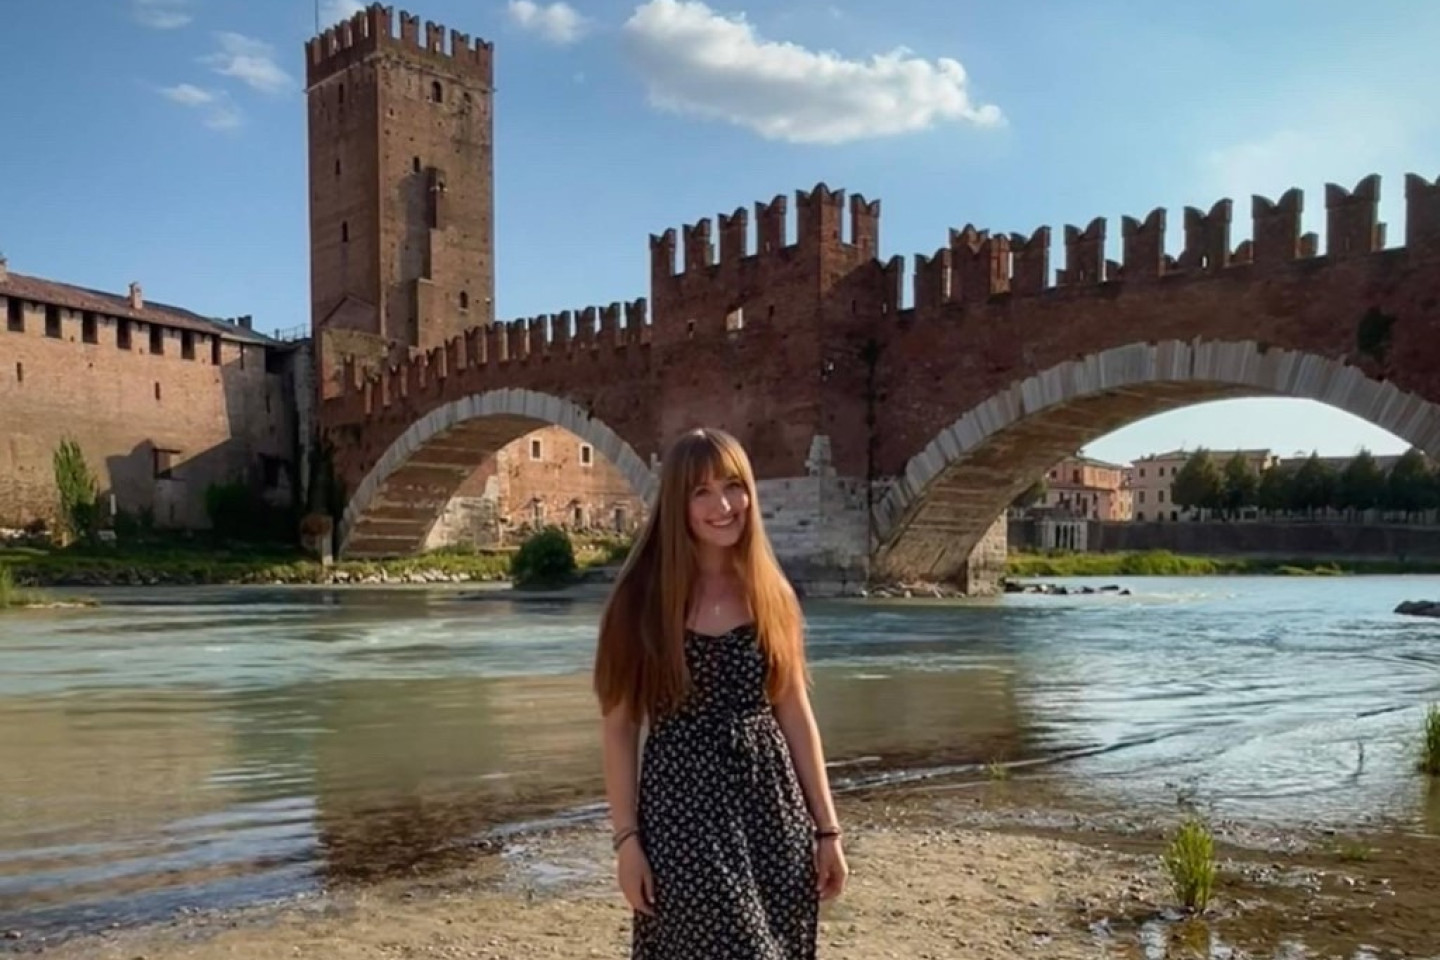 Emma Simpson stands in front of a body of water and bridge.